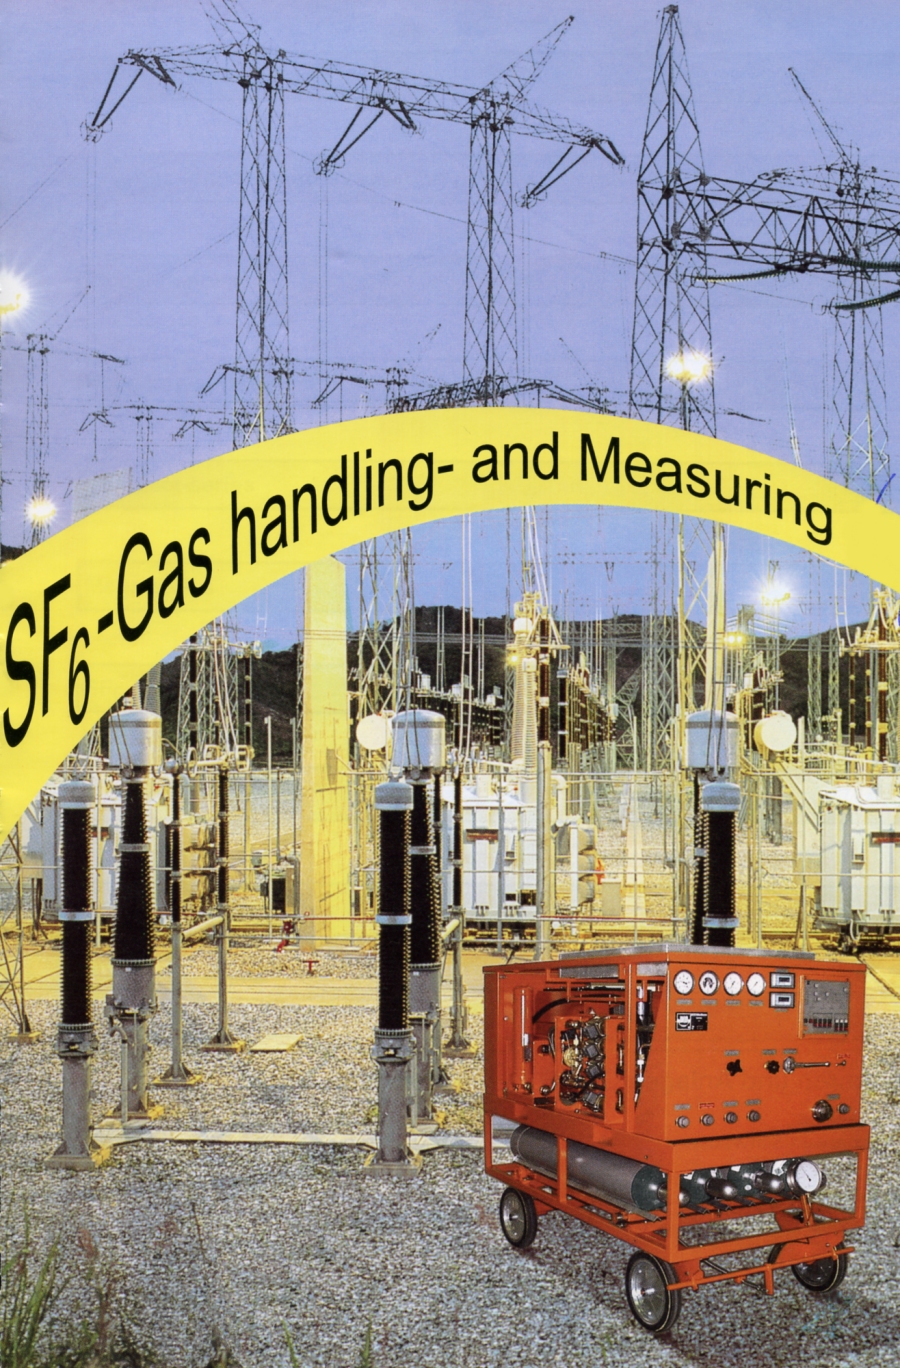 SF6 Gas Handling- and Measuring